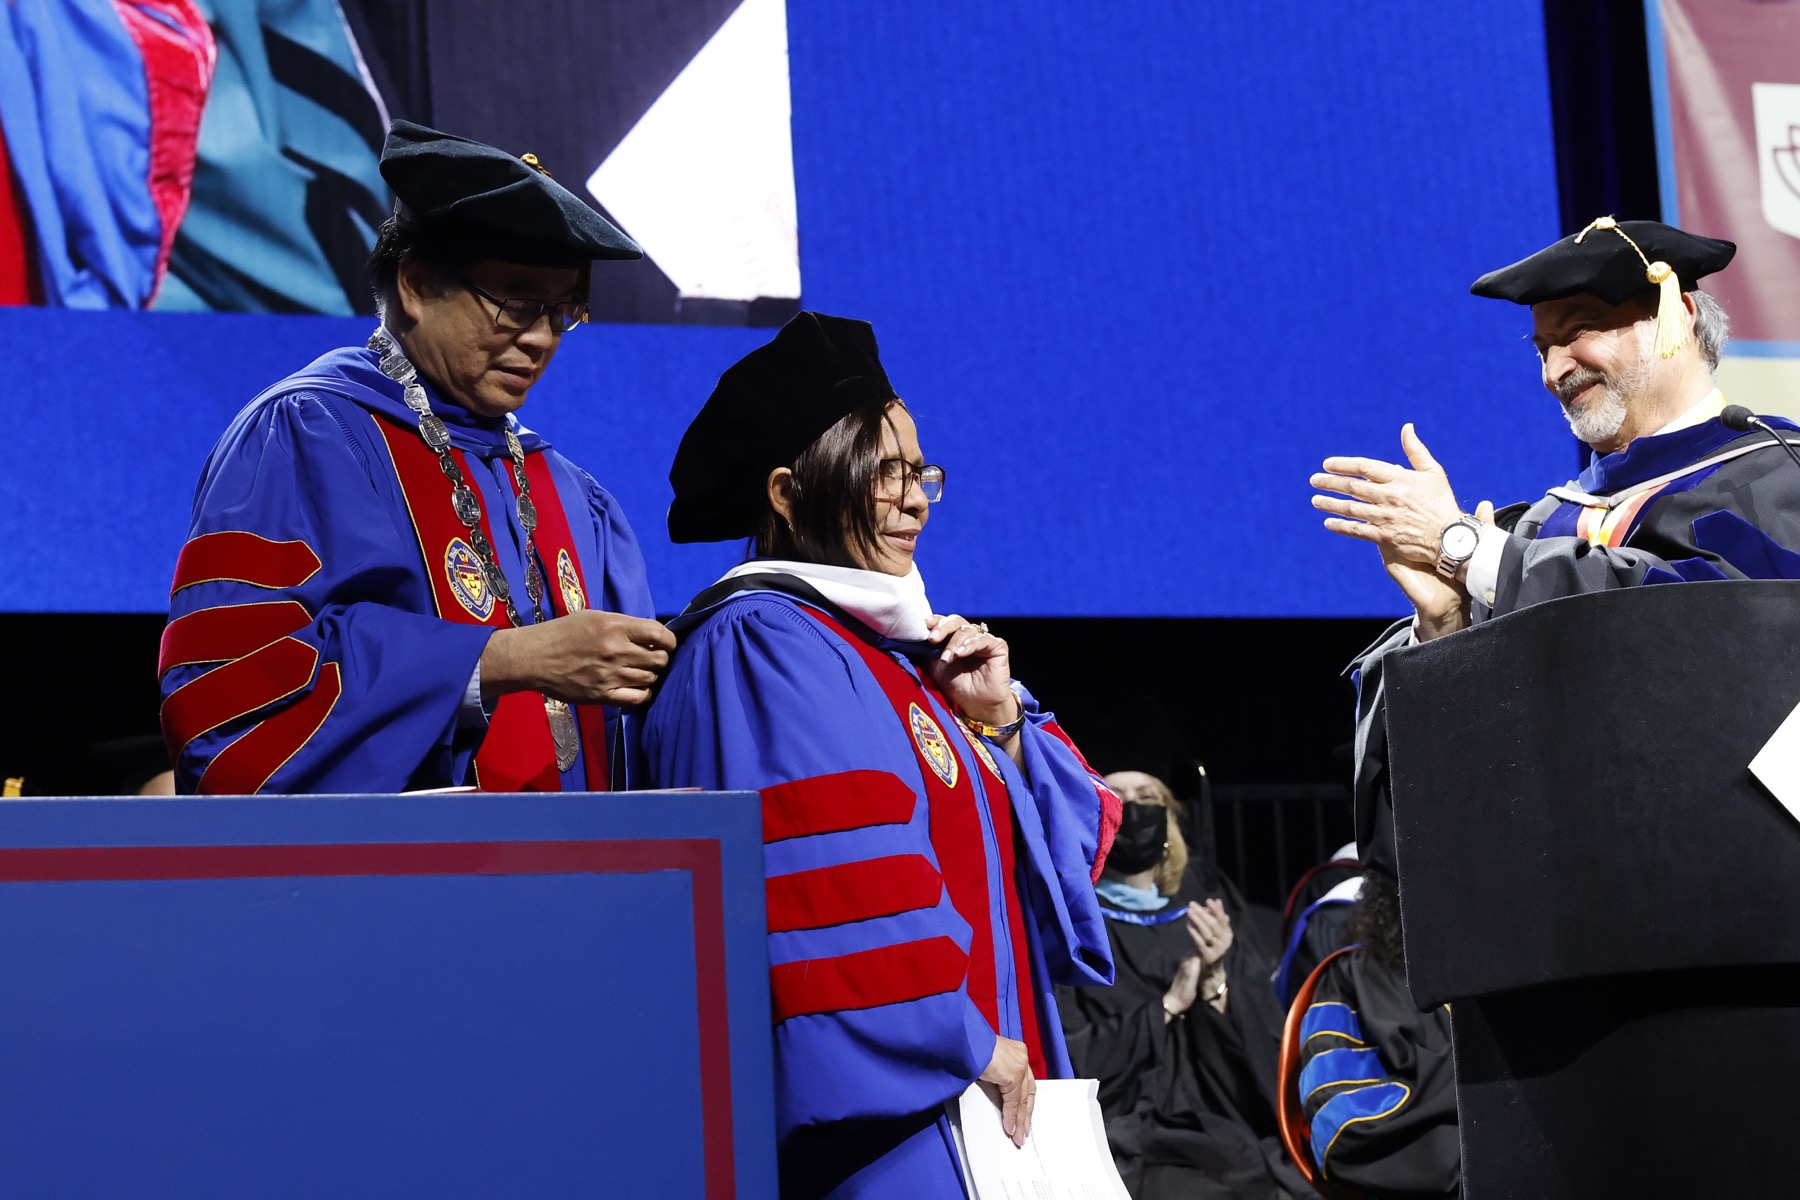 Jessica Sarowitz accepts her honorary degree at the Liberal Arts and Social Sciences and the School of Continuing and Professional Studies ceremony.